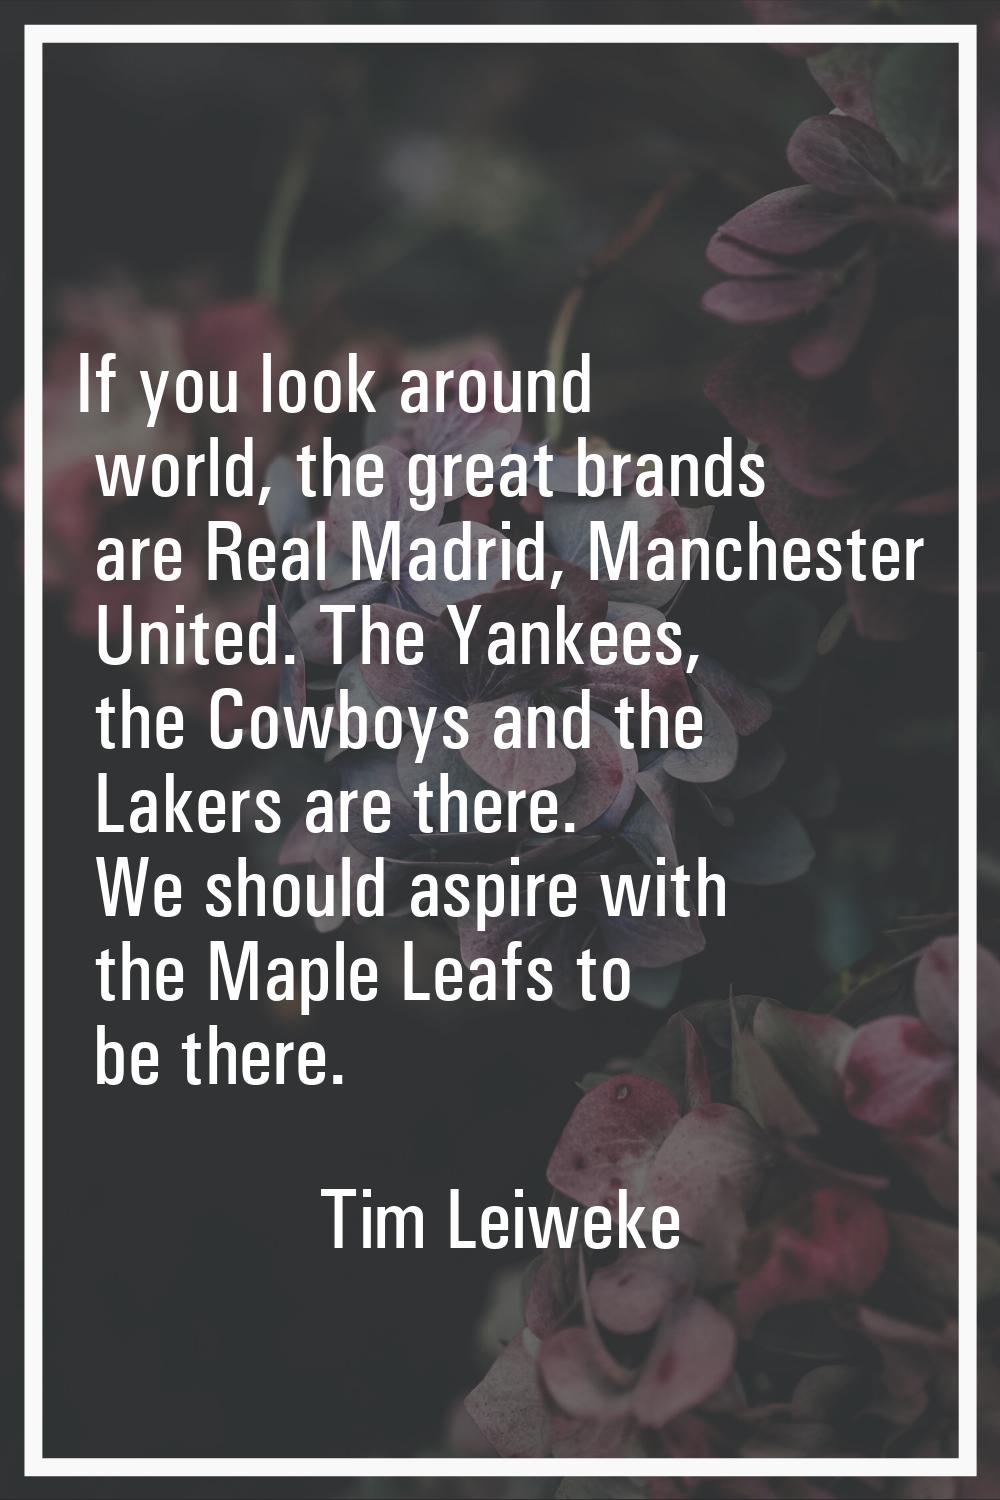 If you look around world, the great brands are Real Madrid, Manchester United. The Yankees, the Cow